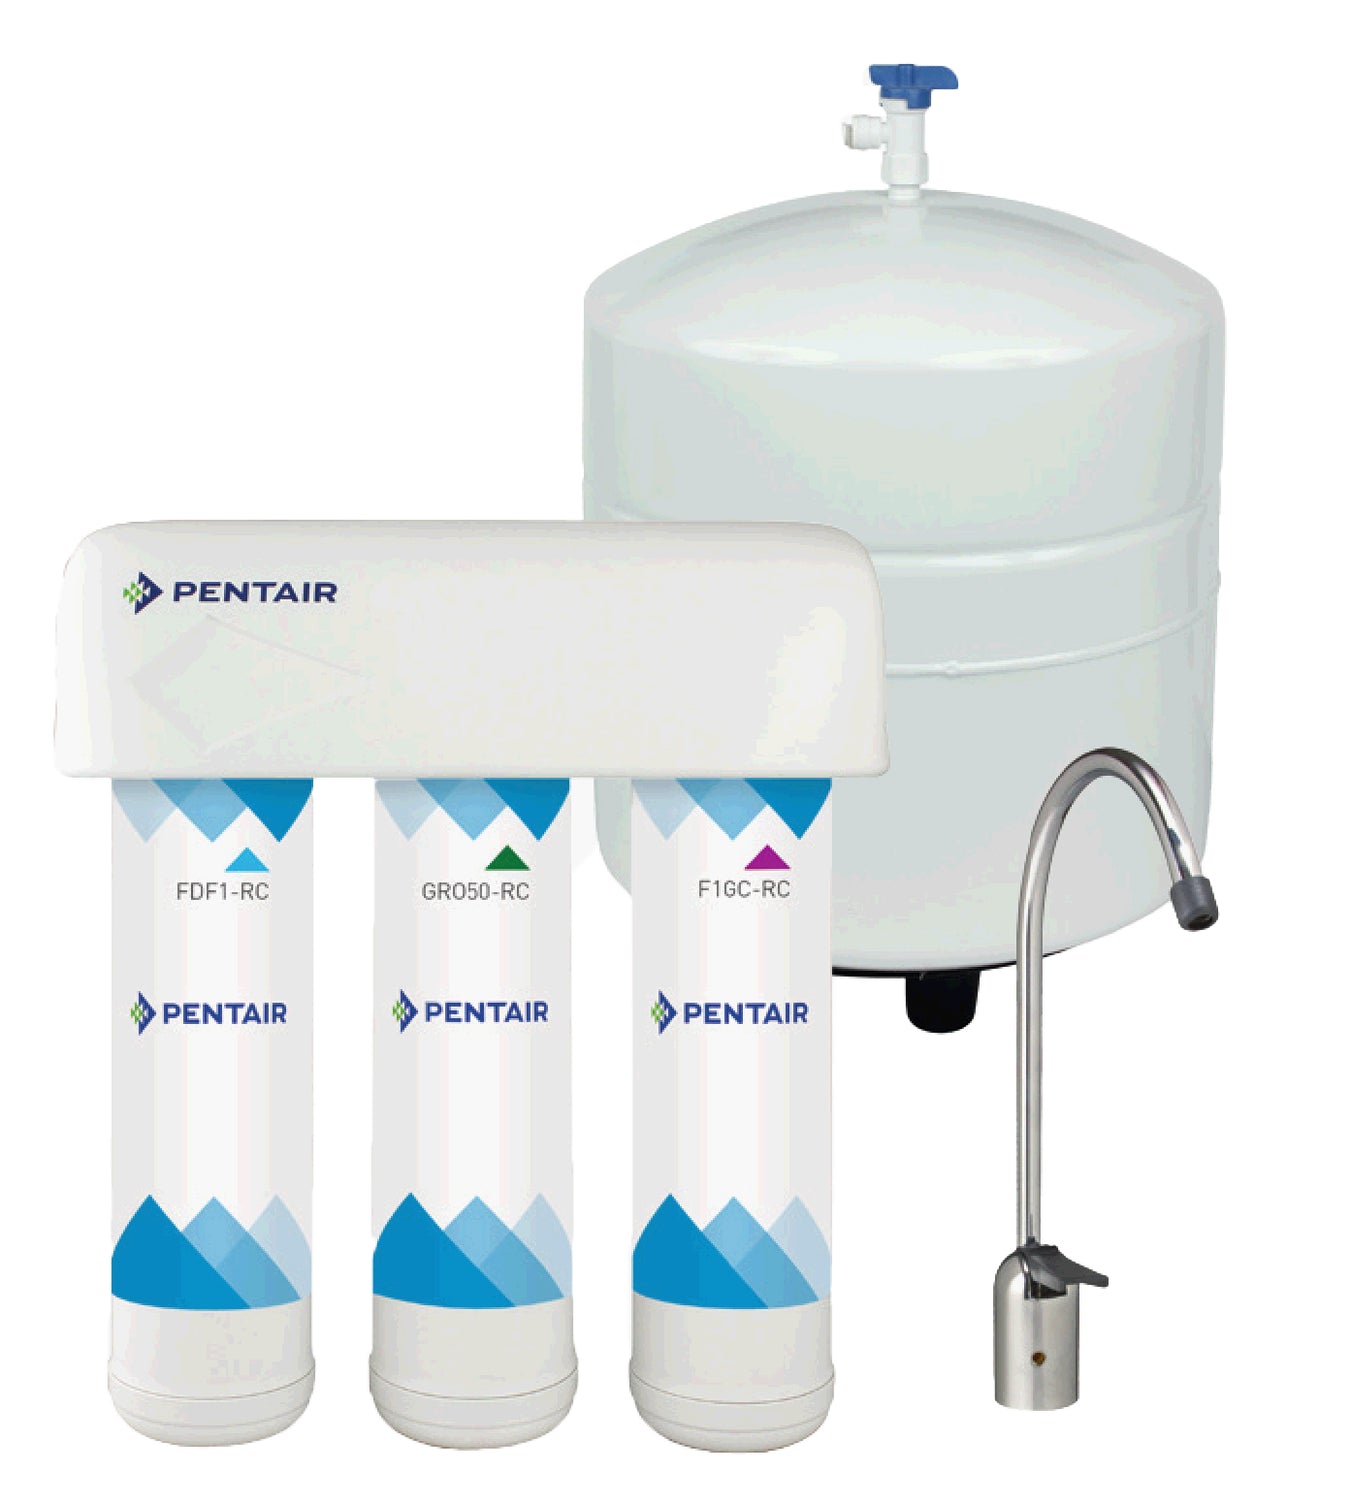 Apartment or Condo Water Filtration Products